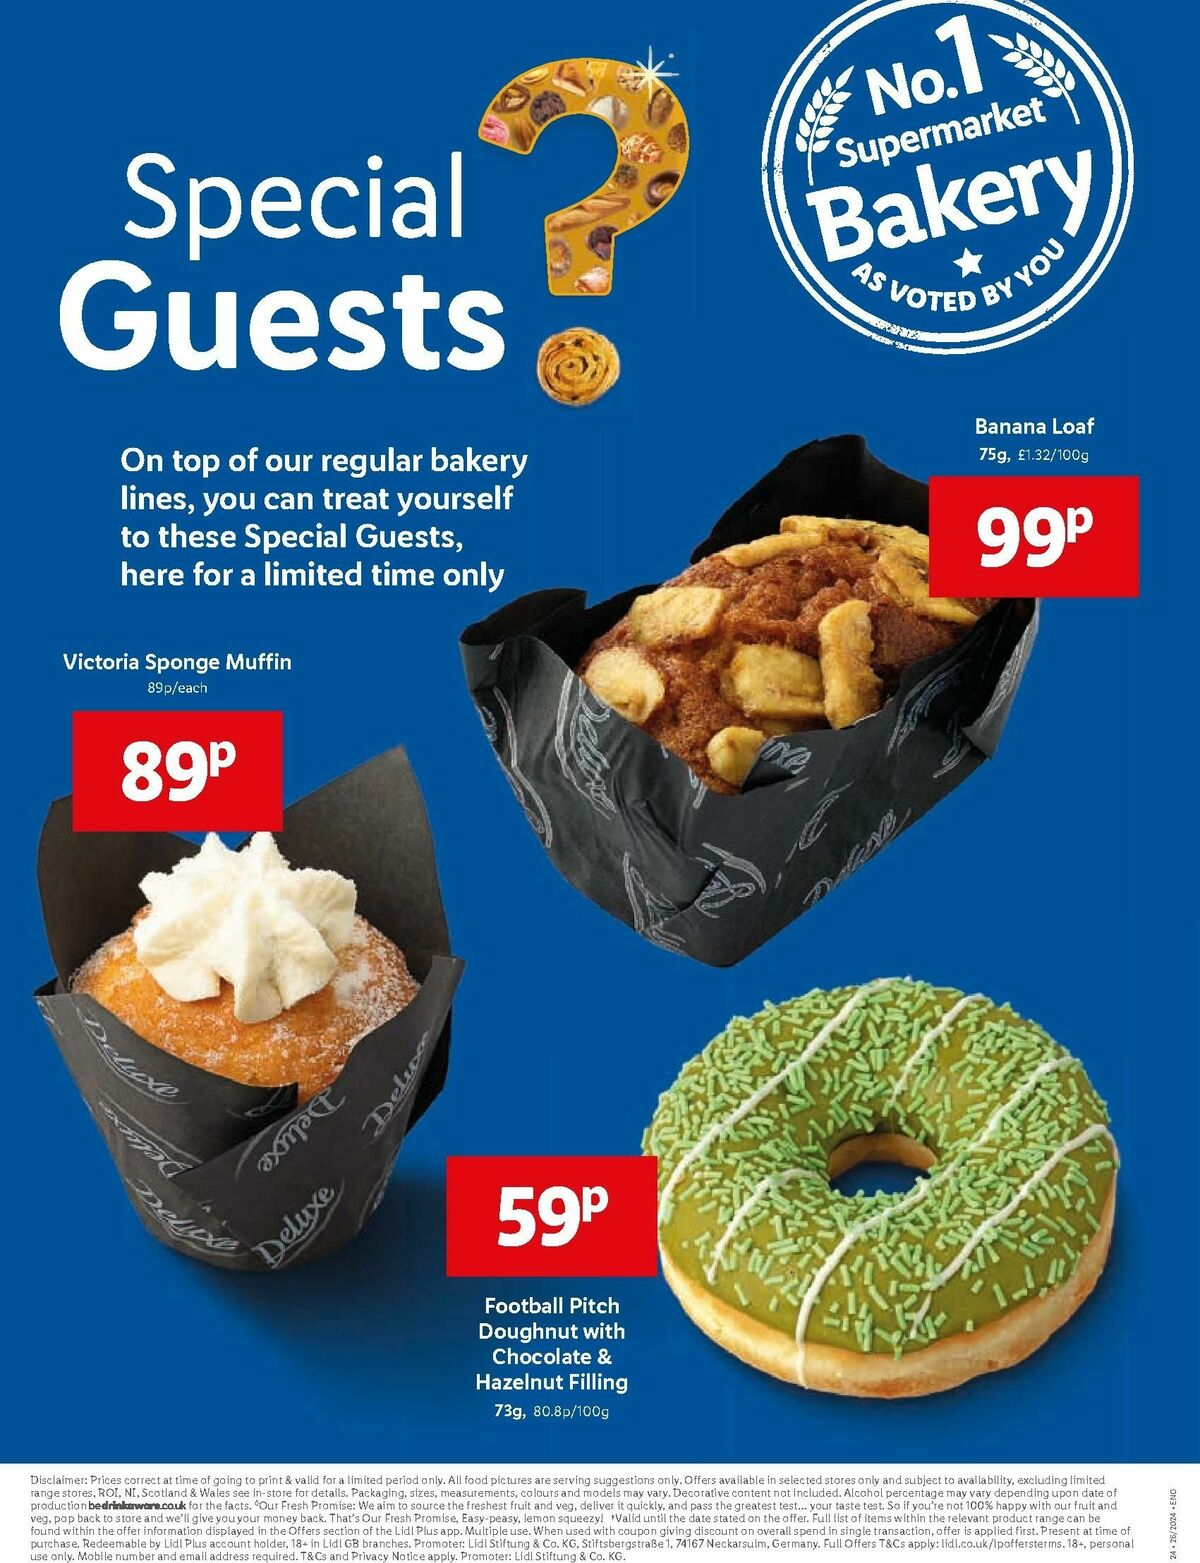 LIDL Offers from 27 June